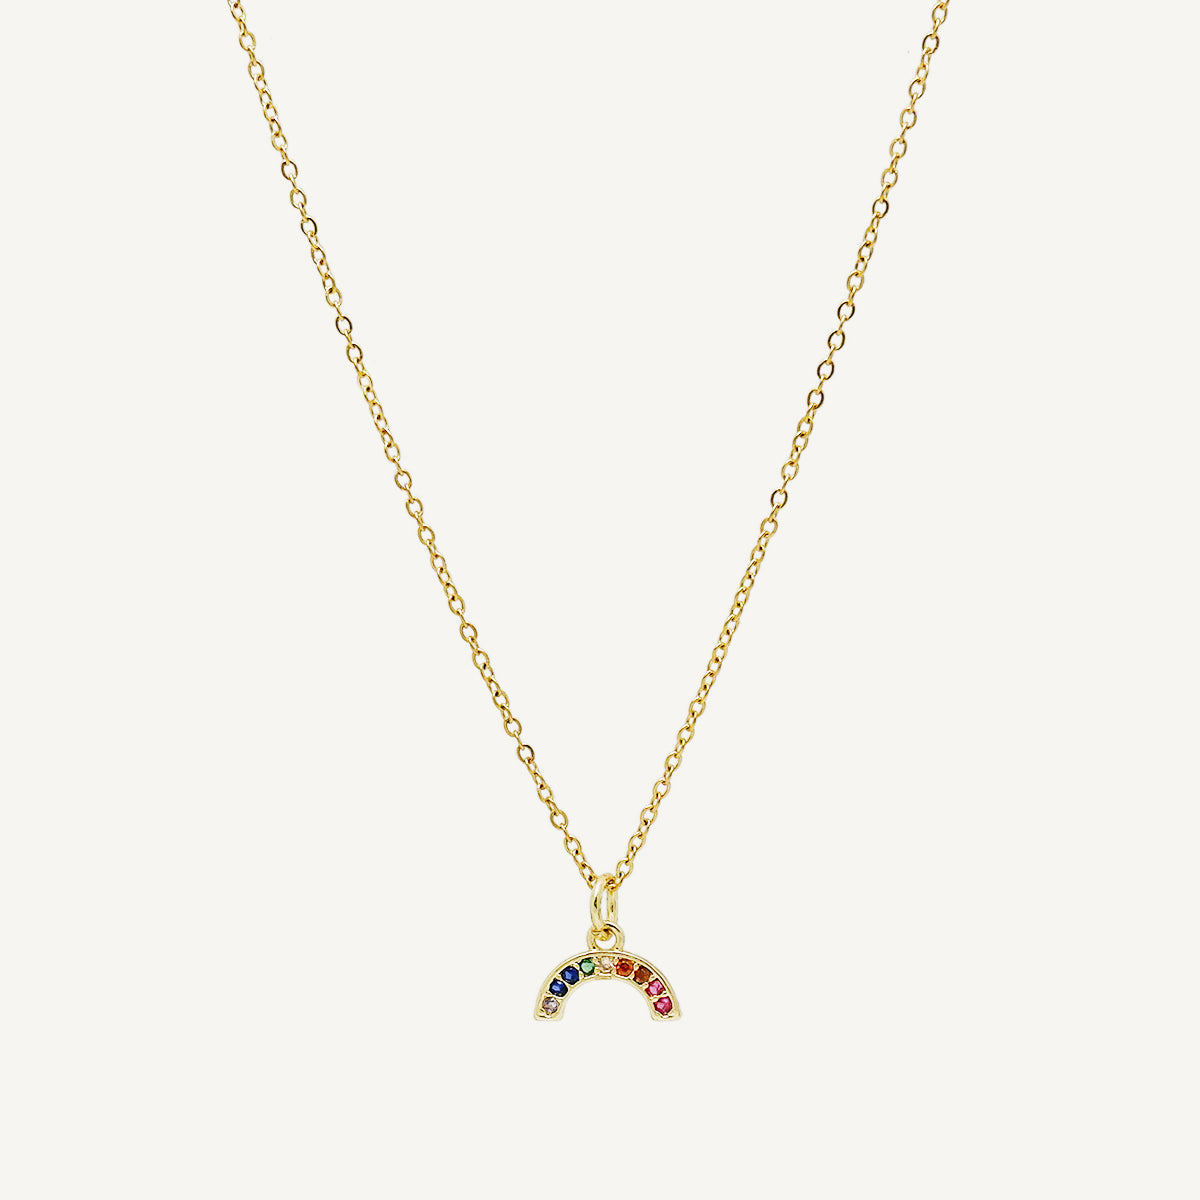 The Color Play Rainbow Necklace